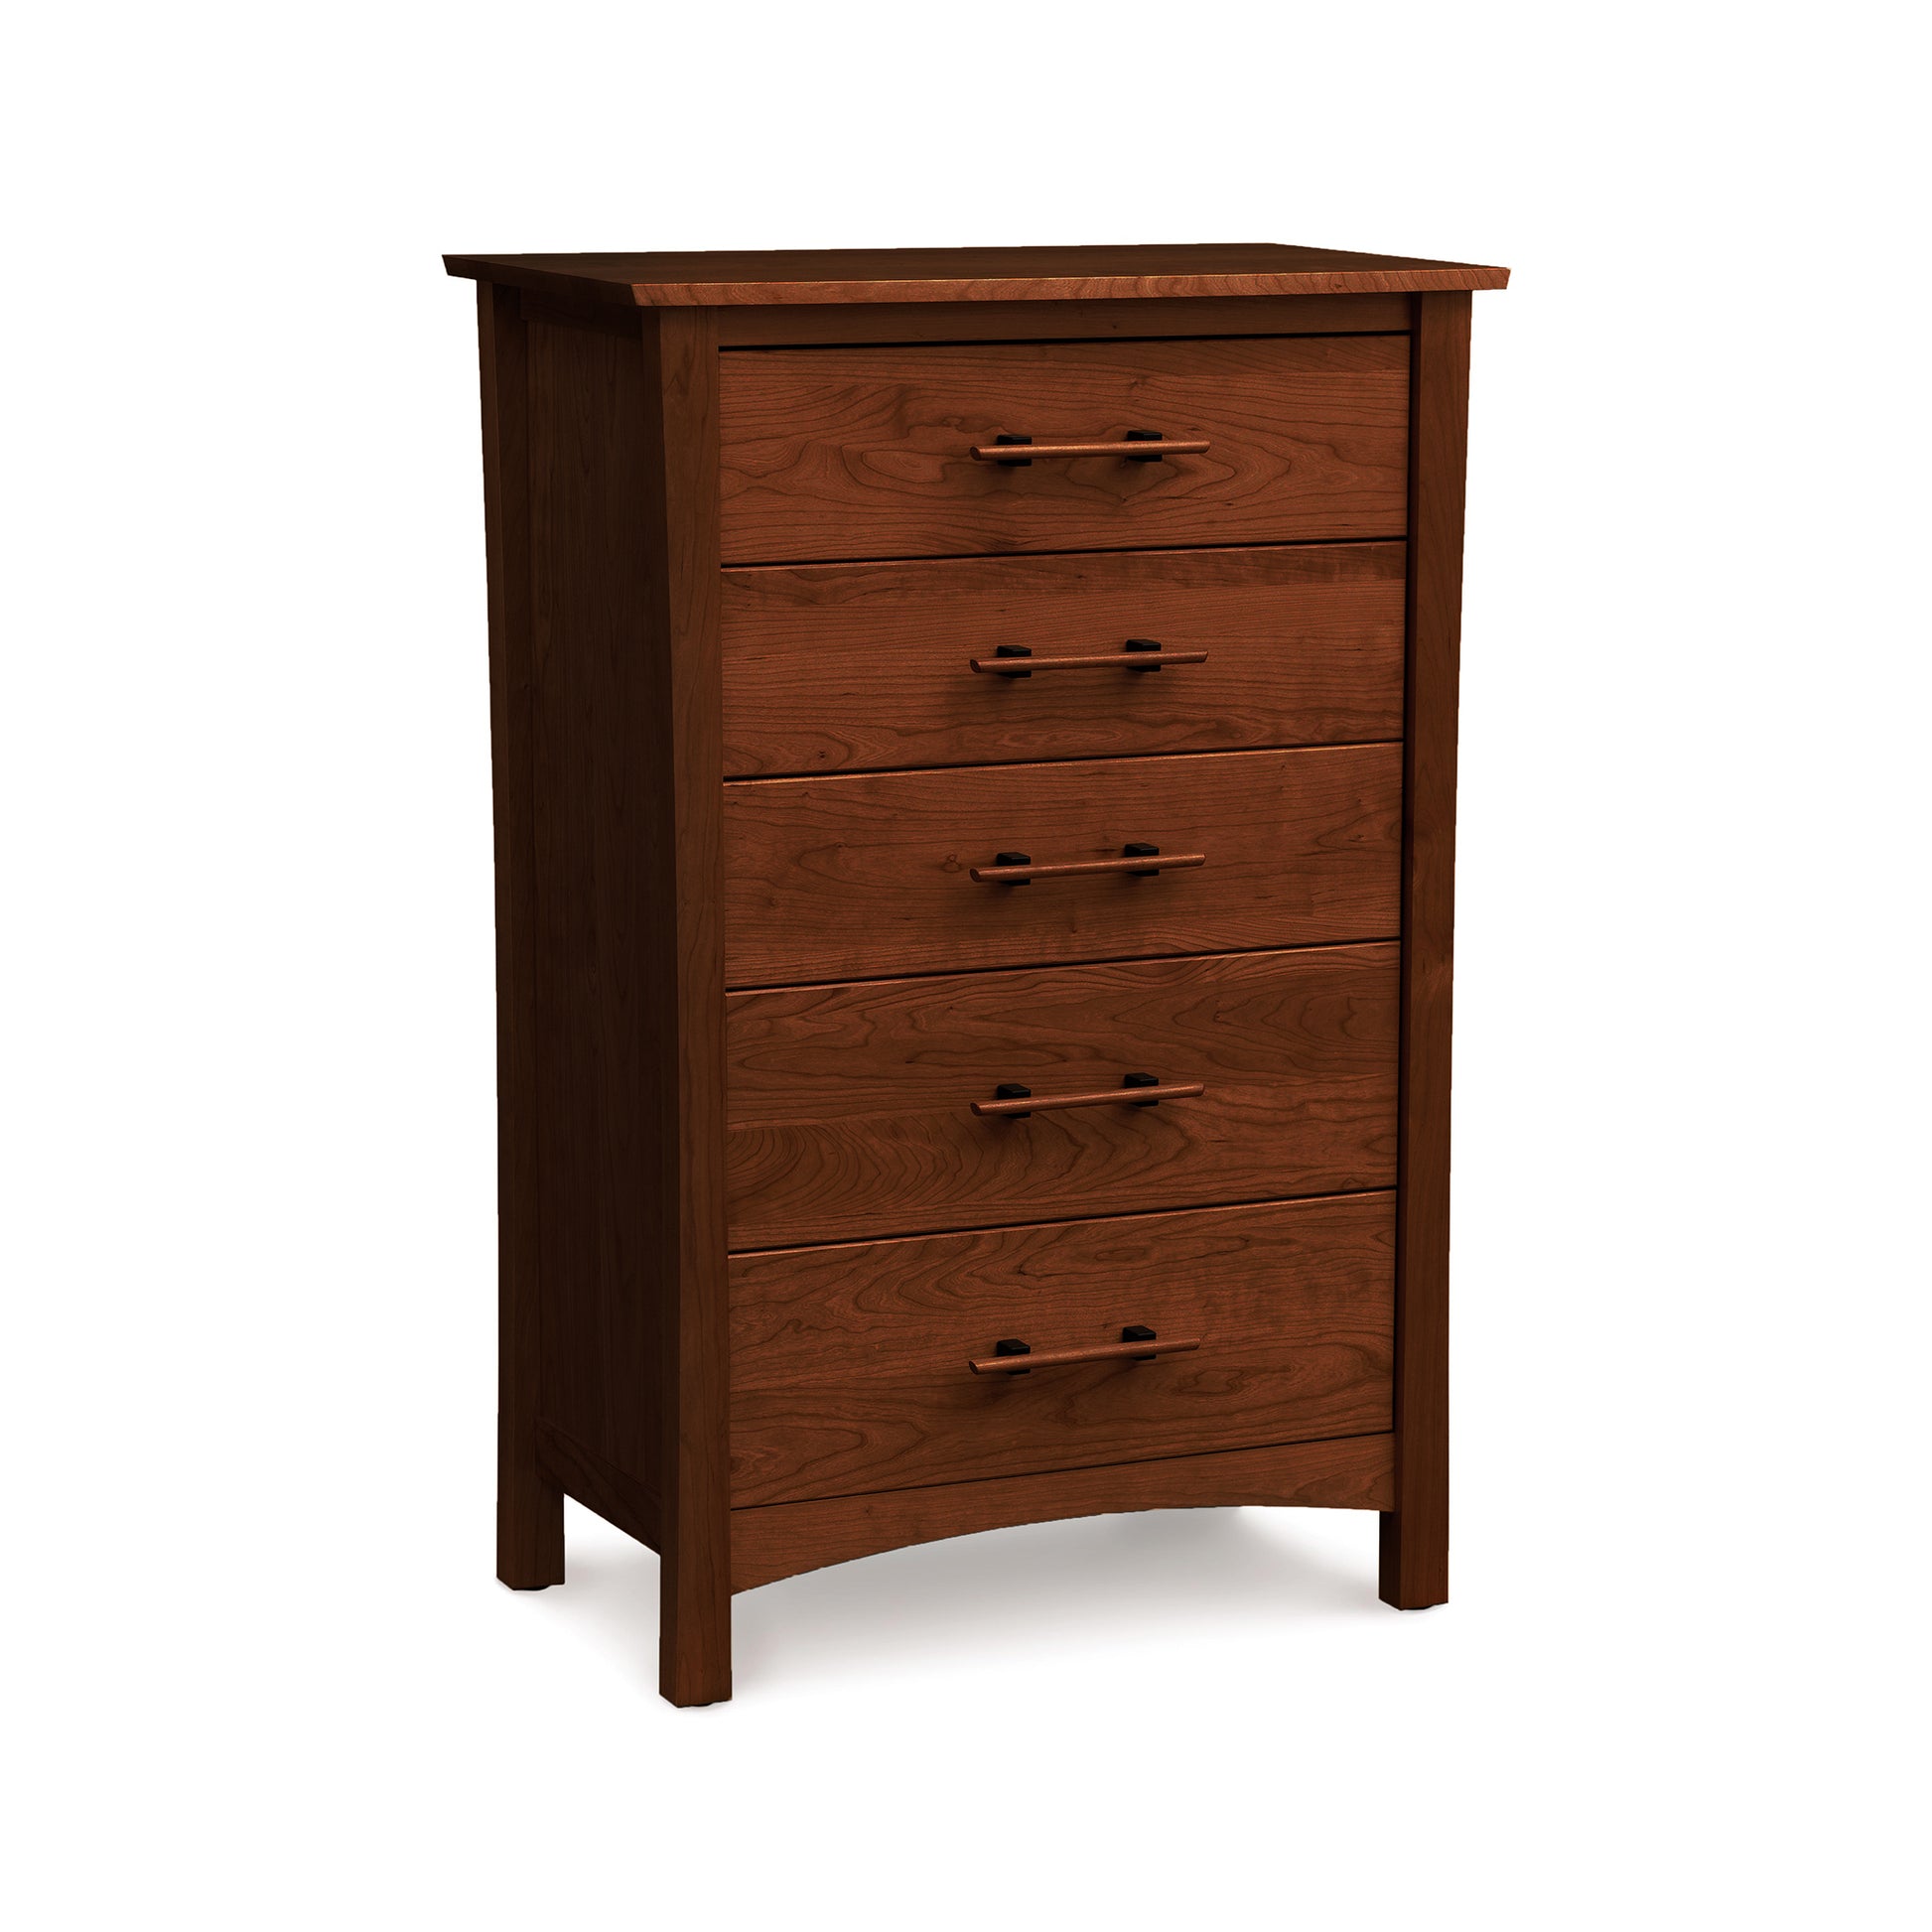 A Monterey 5-Drawer Chest by Copeland Furniture, handmade from cherry wood, featuring four drawers.